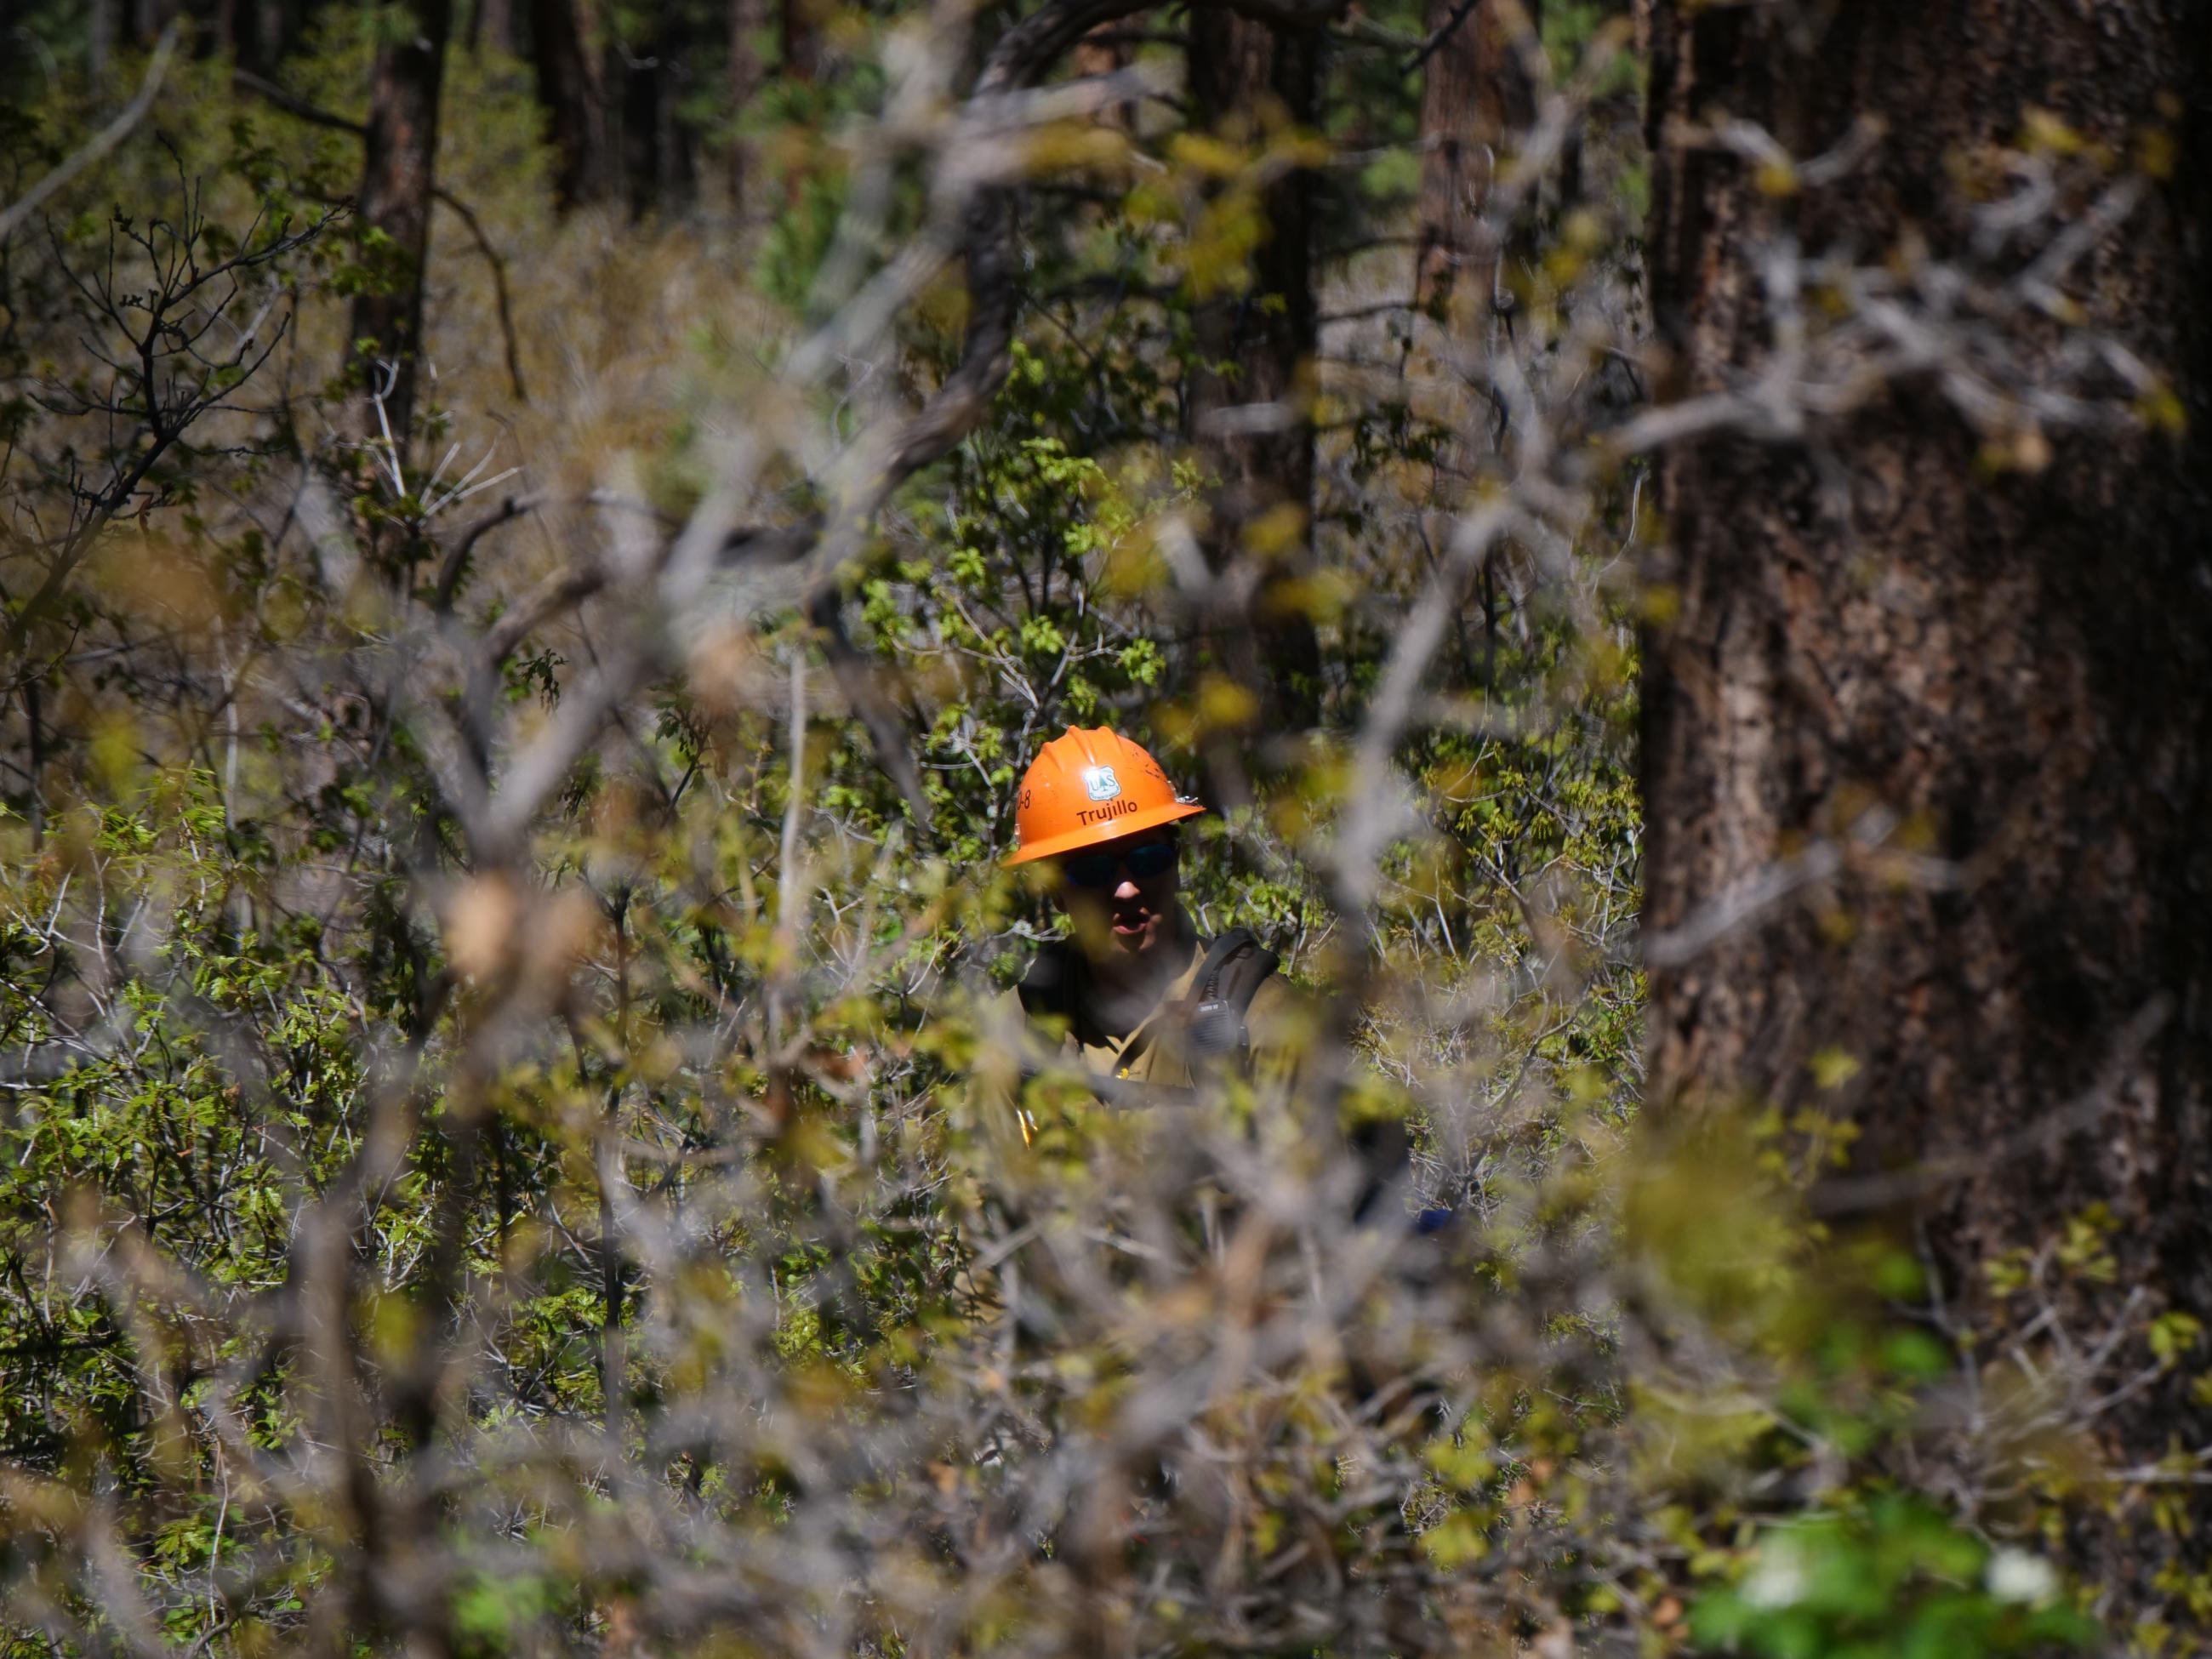 The face and orange helmet can be seen framed by oak brush all around.